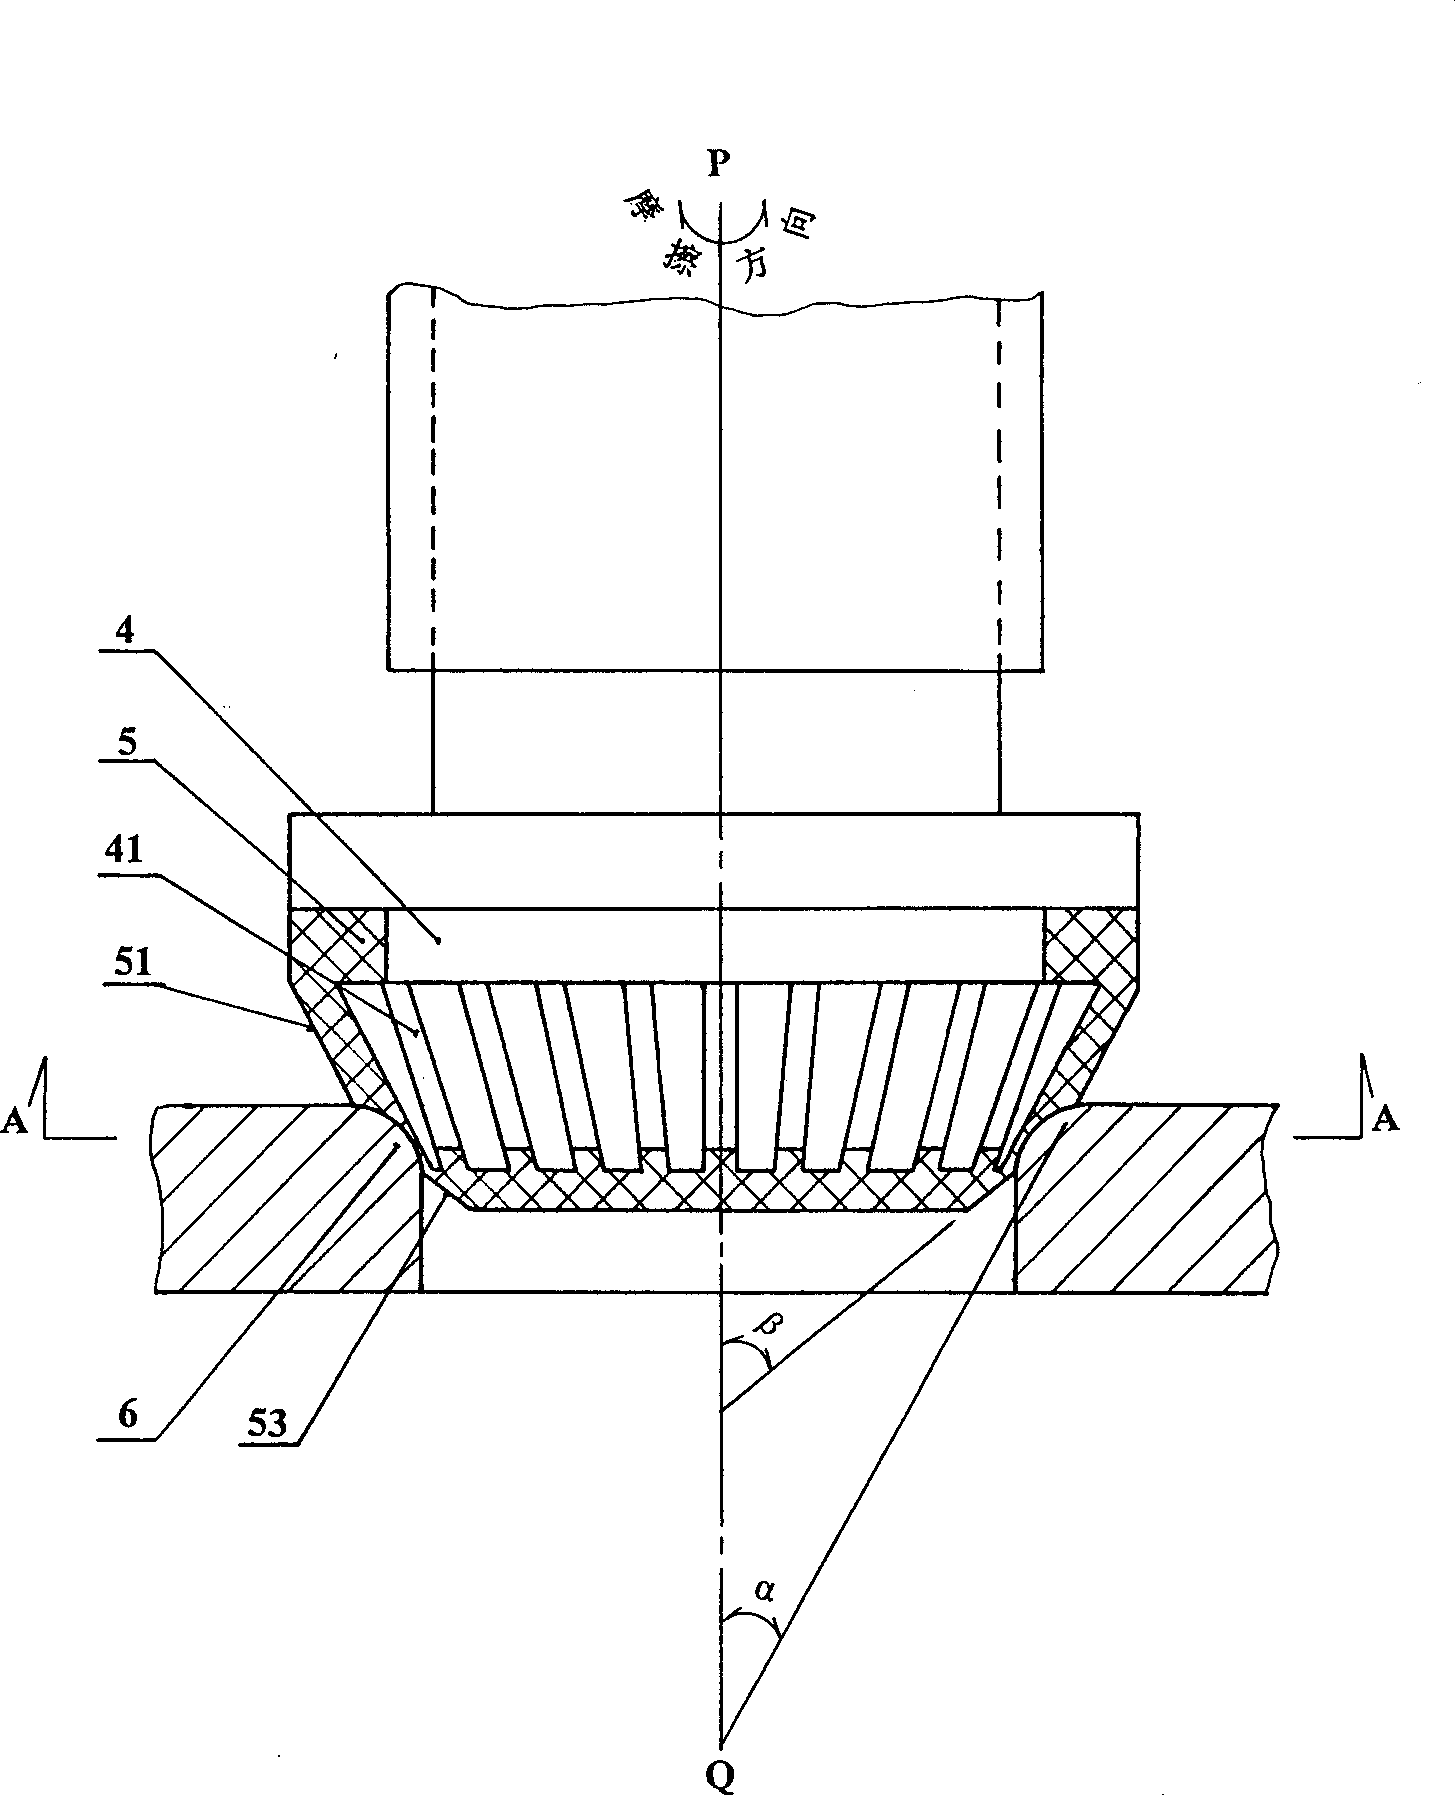 Cut-off valve structure for fast opening or closing